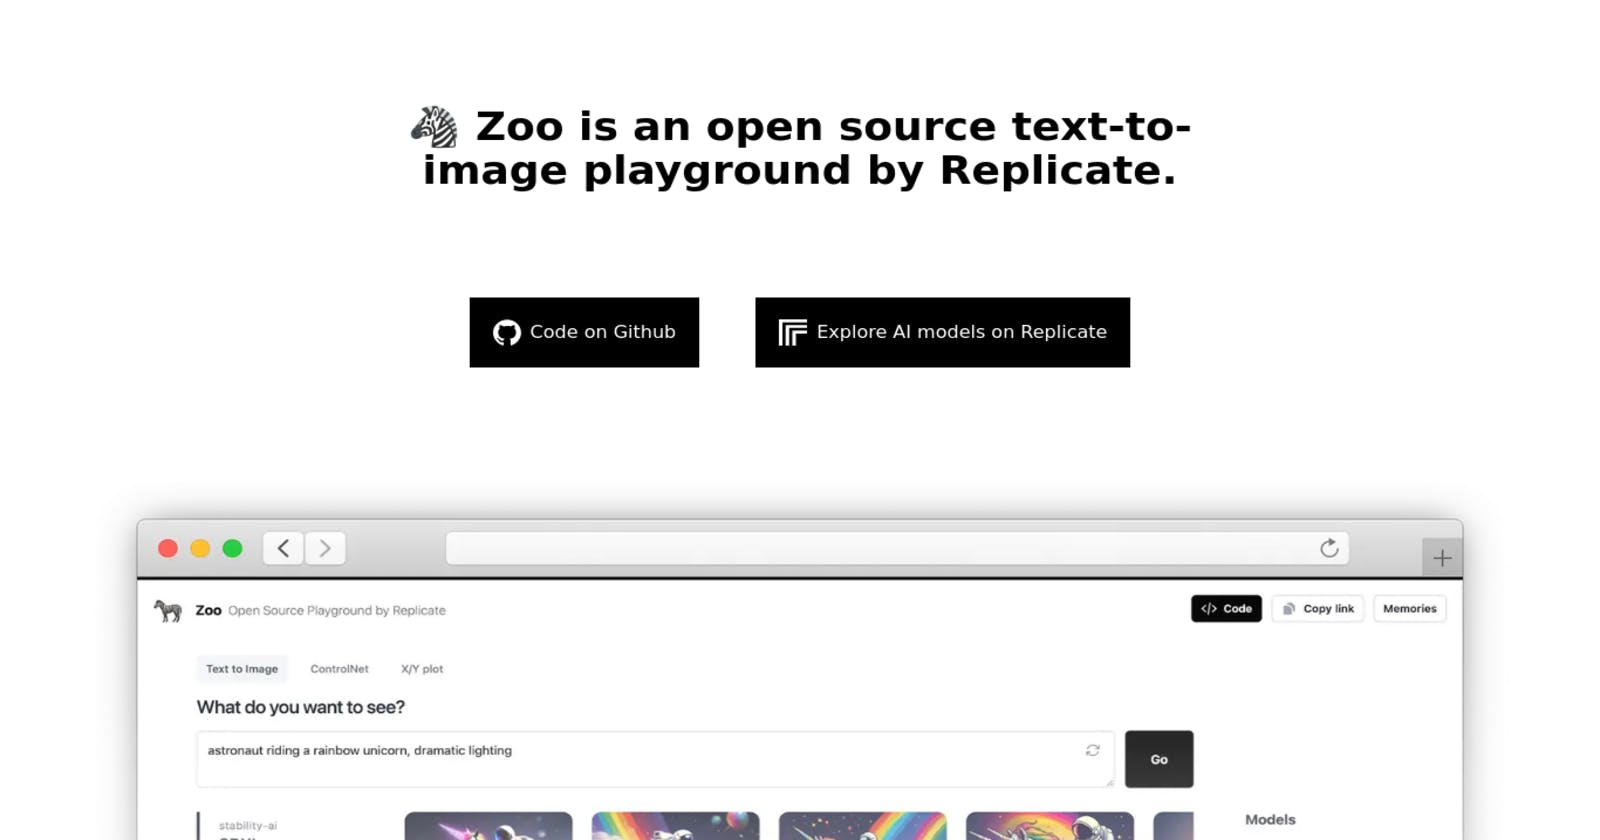 Exploring Zoo - Replicate's Open Source Text-to-Image Playground